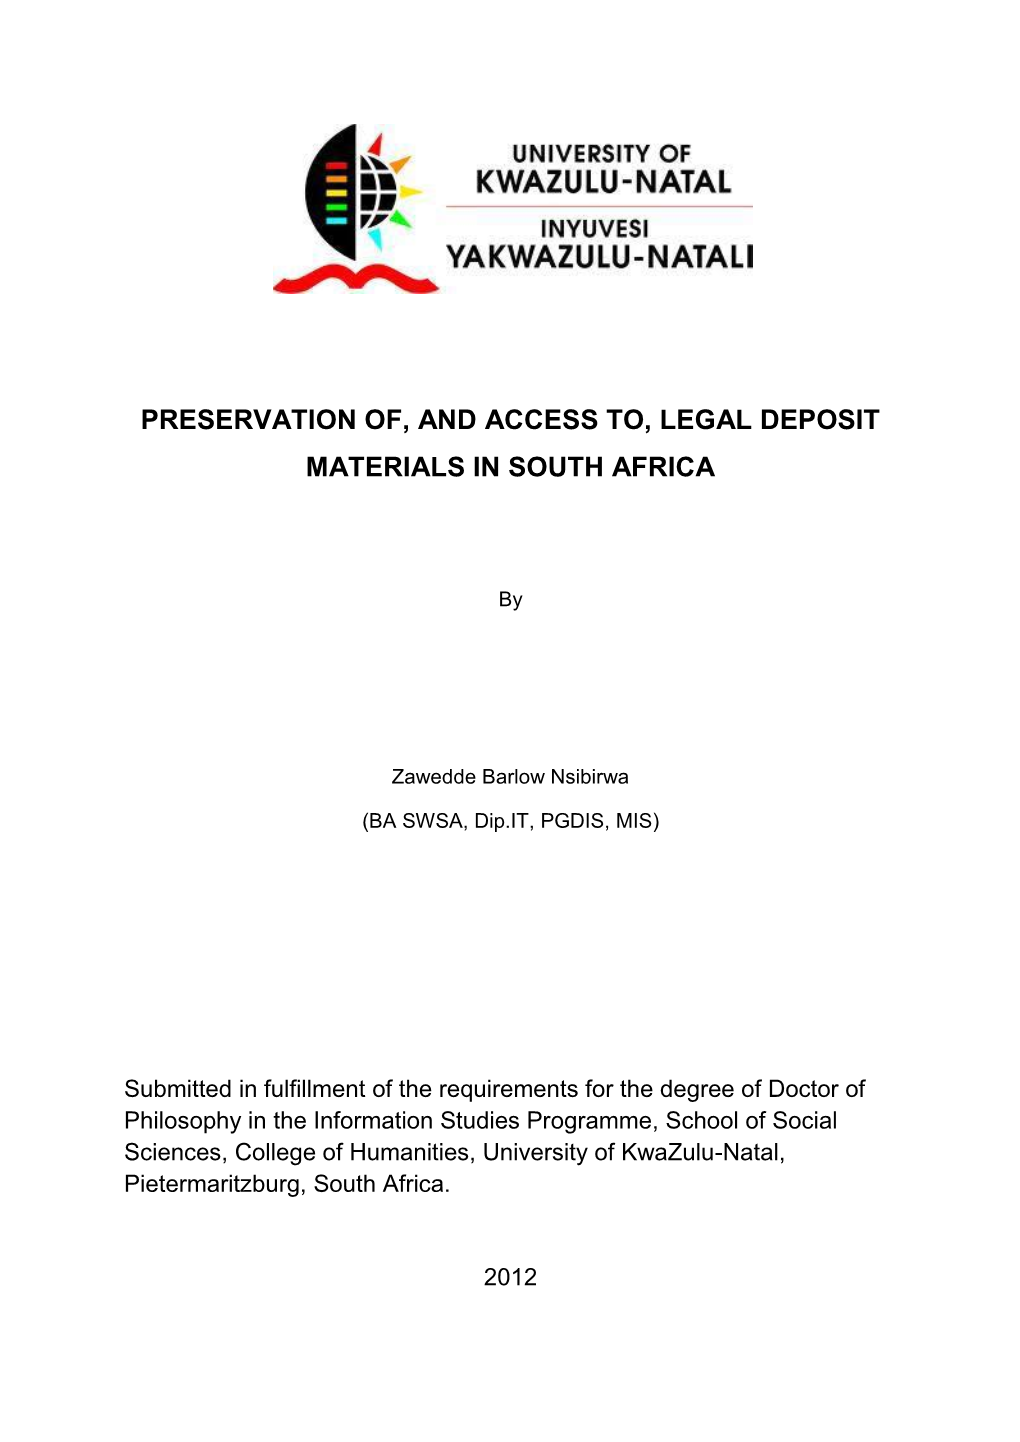 Preservation Of, and Access To, Legal Deposit Materials in South Africa